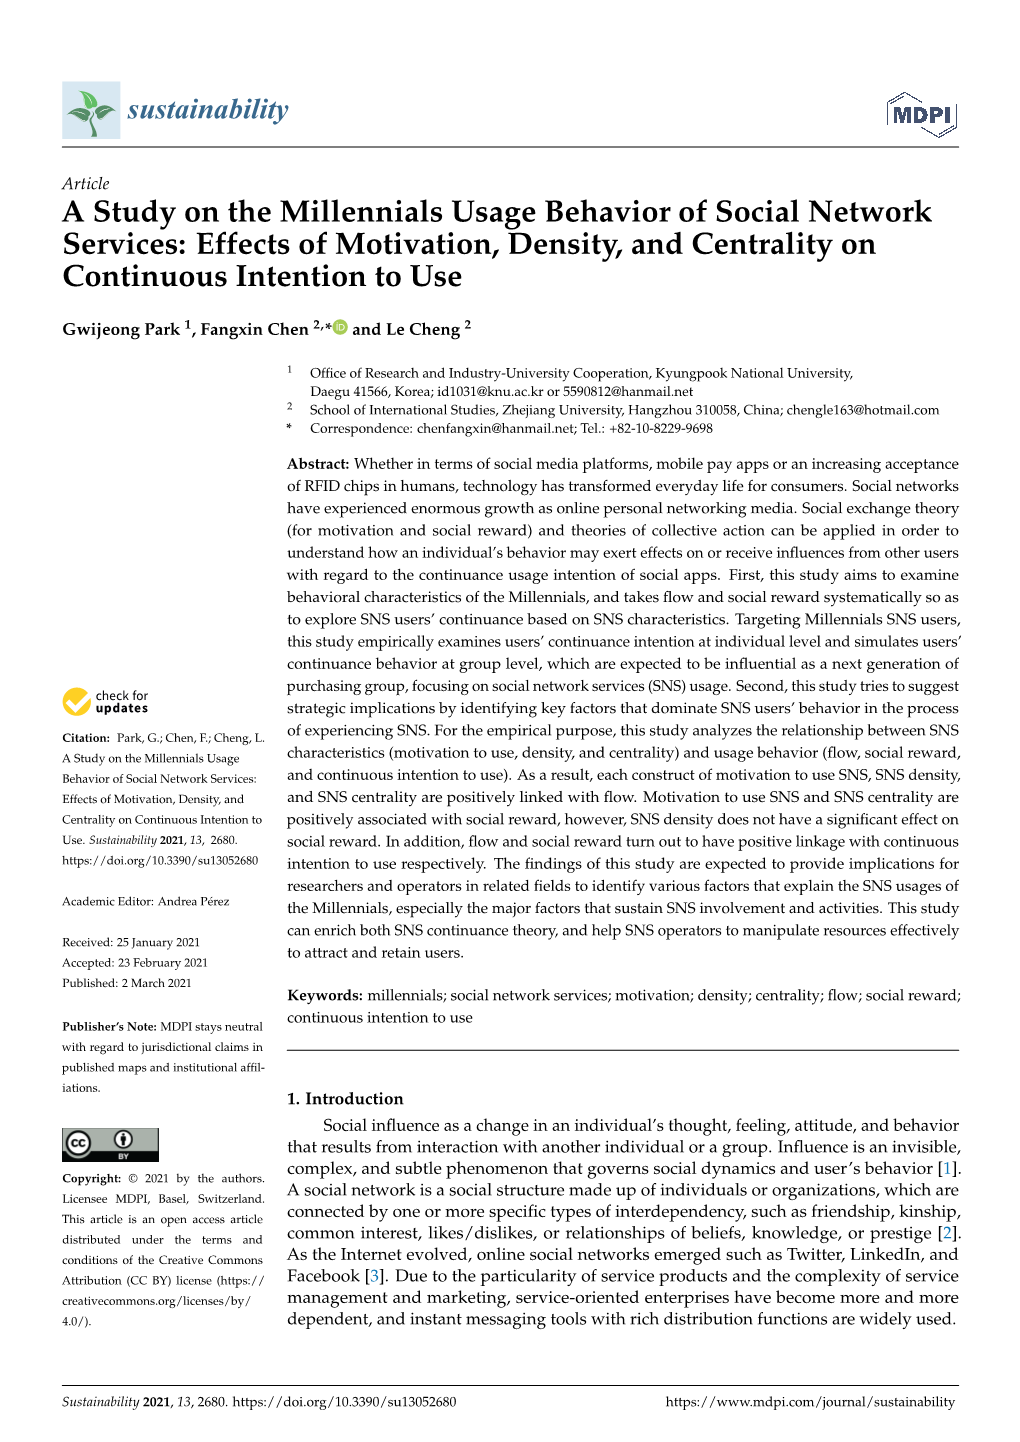 A Study on the Millennials Usage Behavior of Social Network Services: Effects of Motivation, Density, and Centrality on Continuous Intention to Use